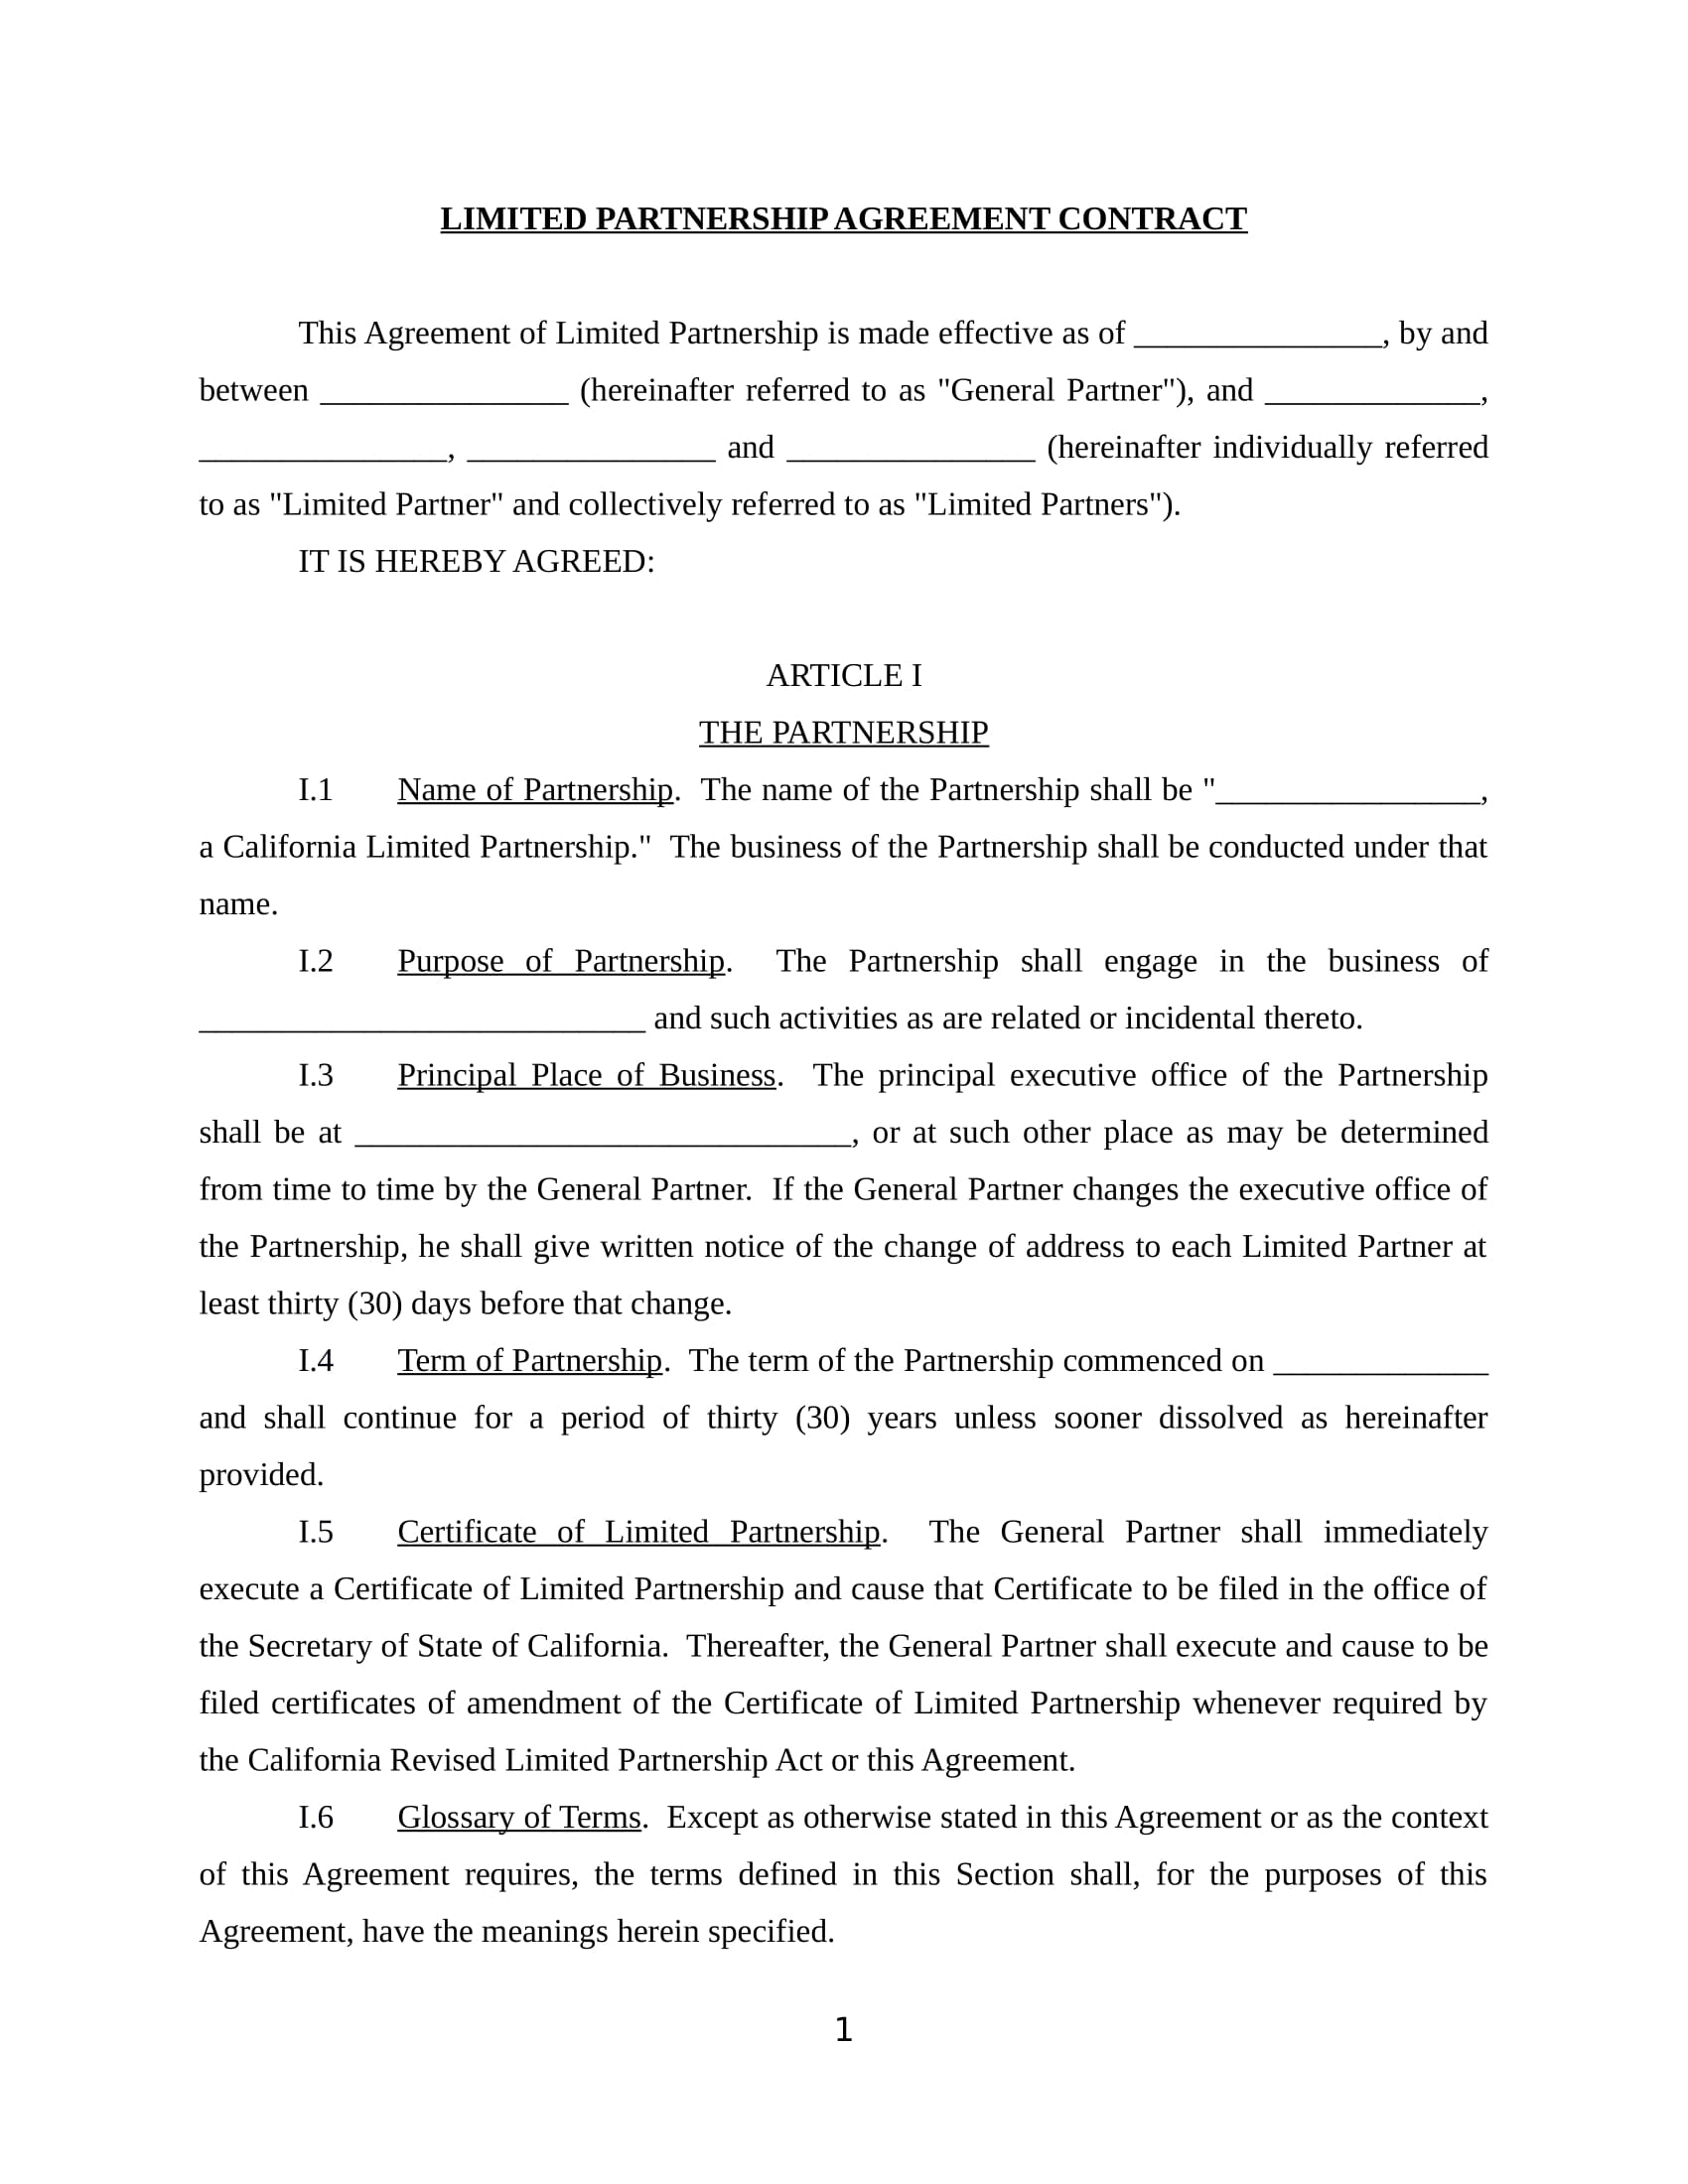 limited partnership agreement contract form in doc 01